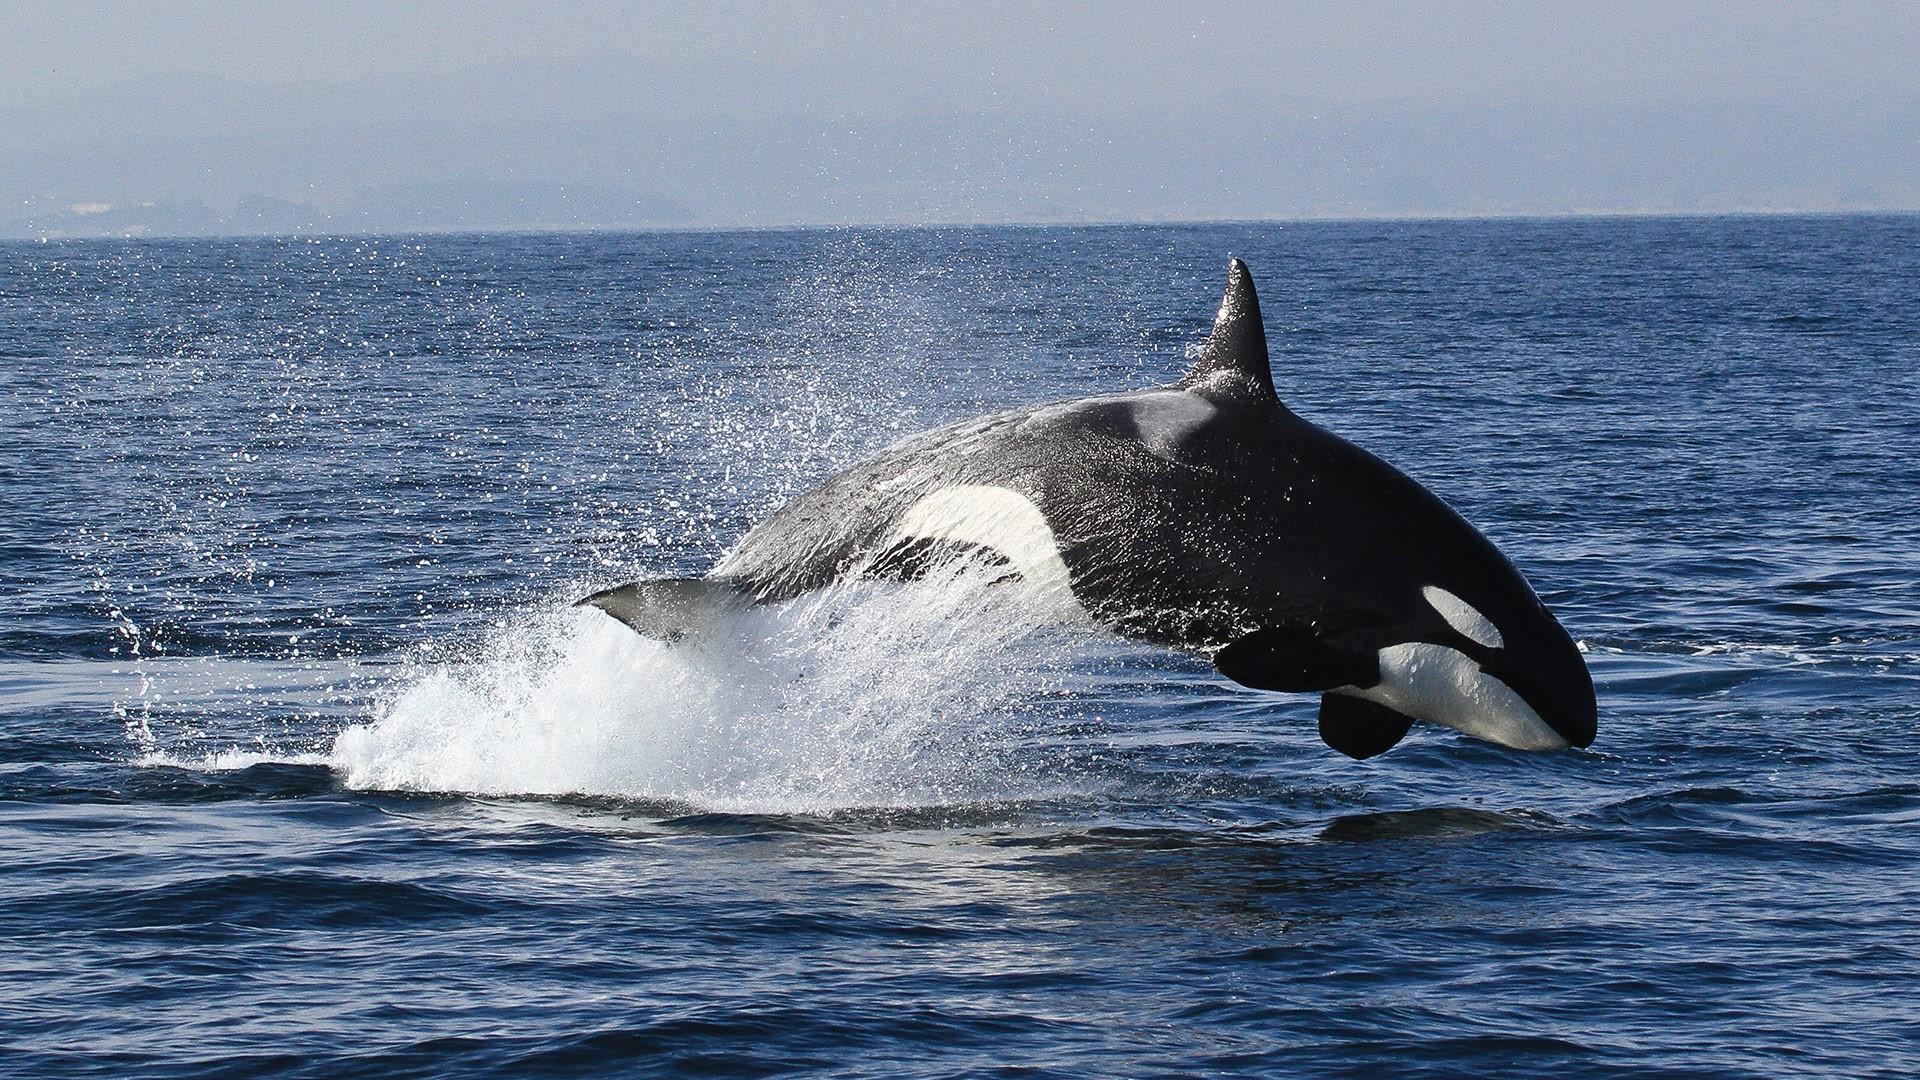 1920x1080 Bigg's (Transient) killer whale (Orcinus orca), Monterey Bay whale watch, California, USA | Windows 10 Spotlight Images